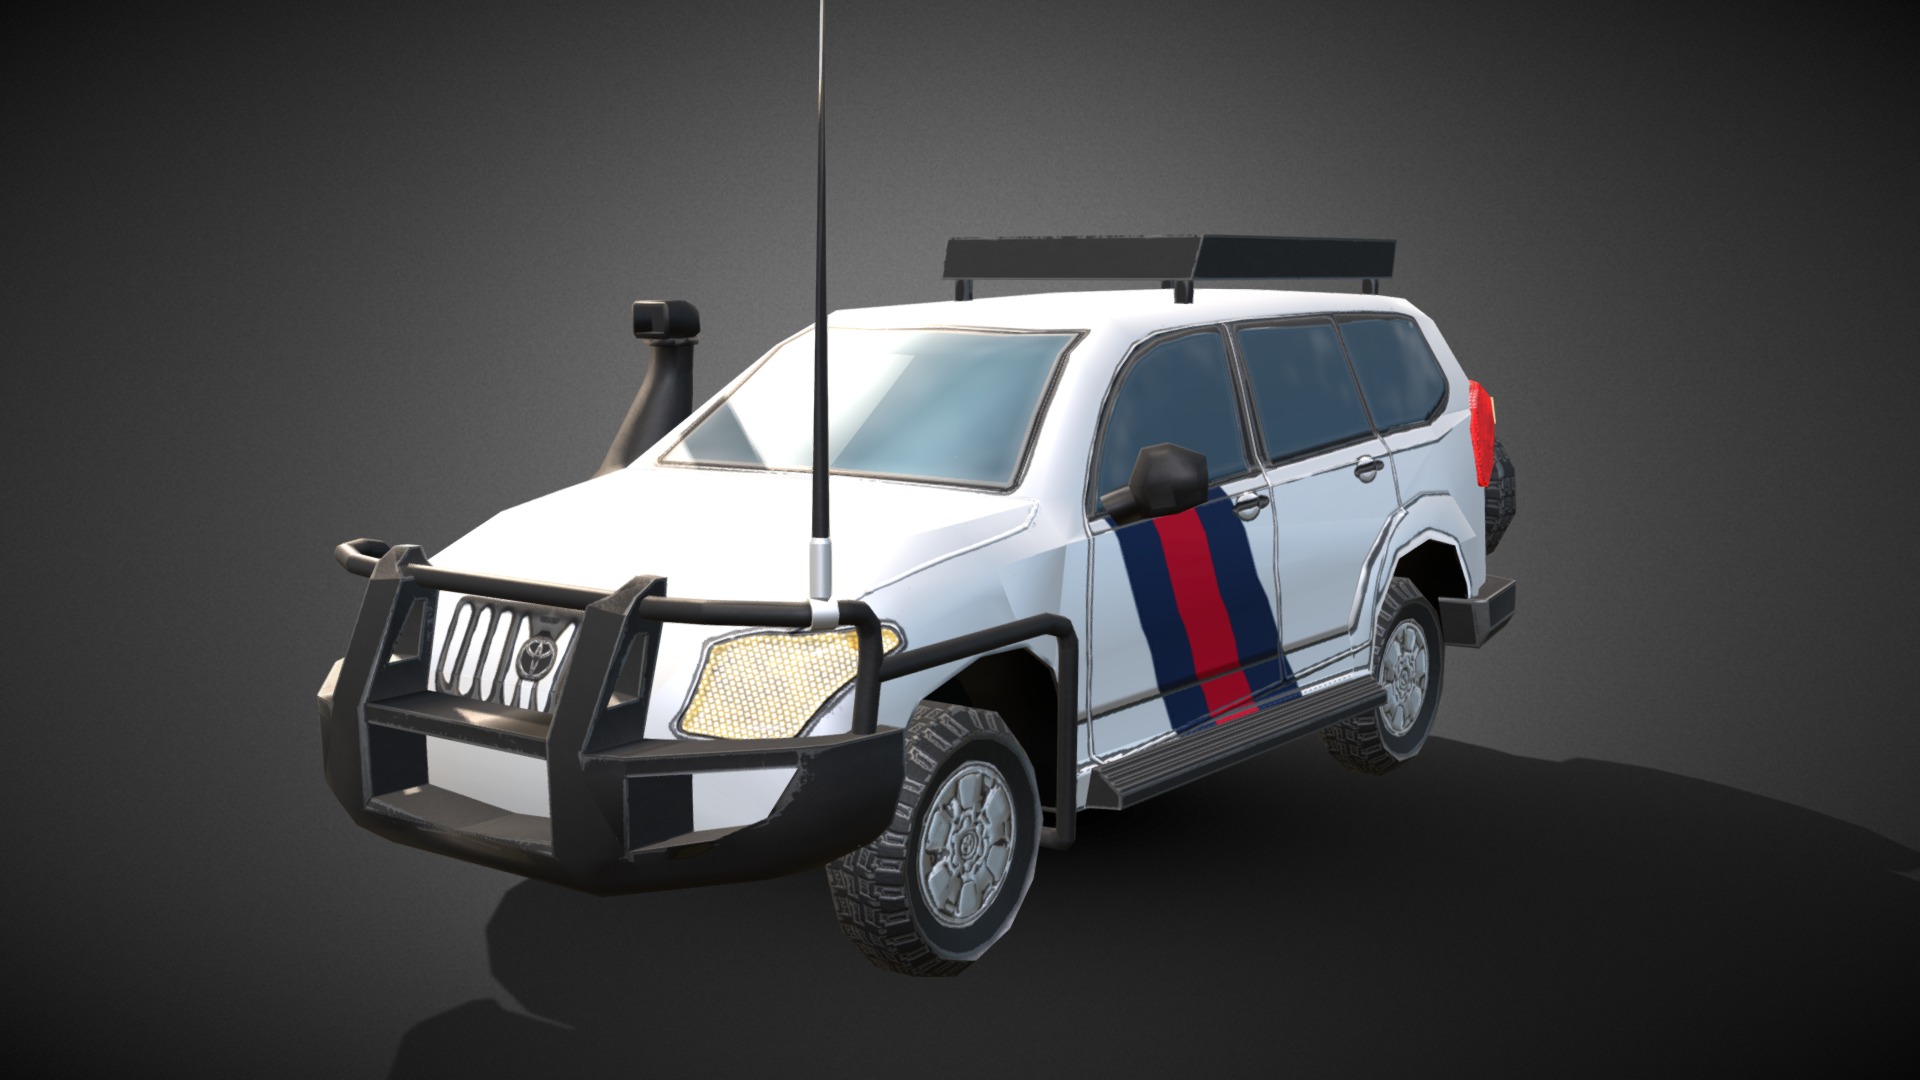 3D model Toyota Prado - This is a 3D model of the Toyota Prado. The 3D model is about a small white car.